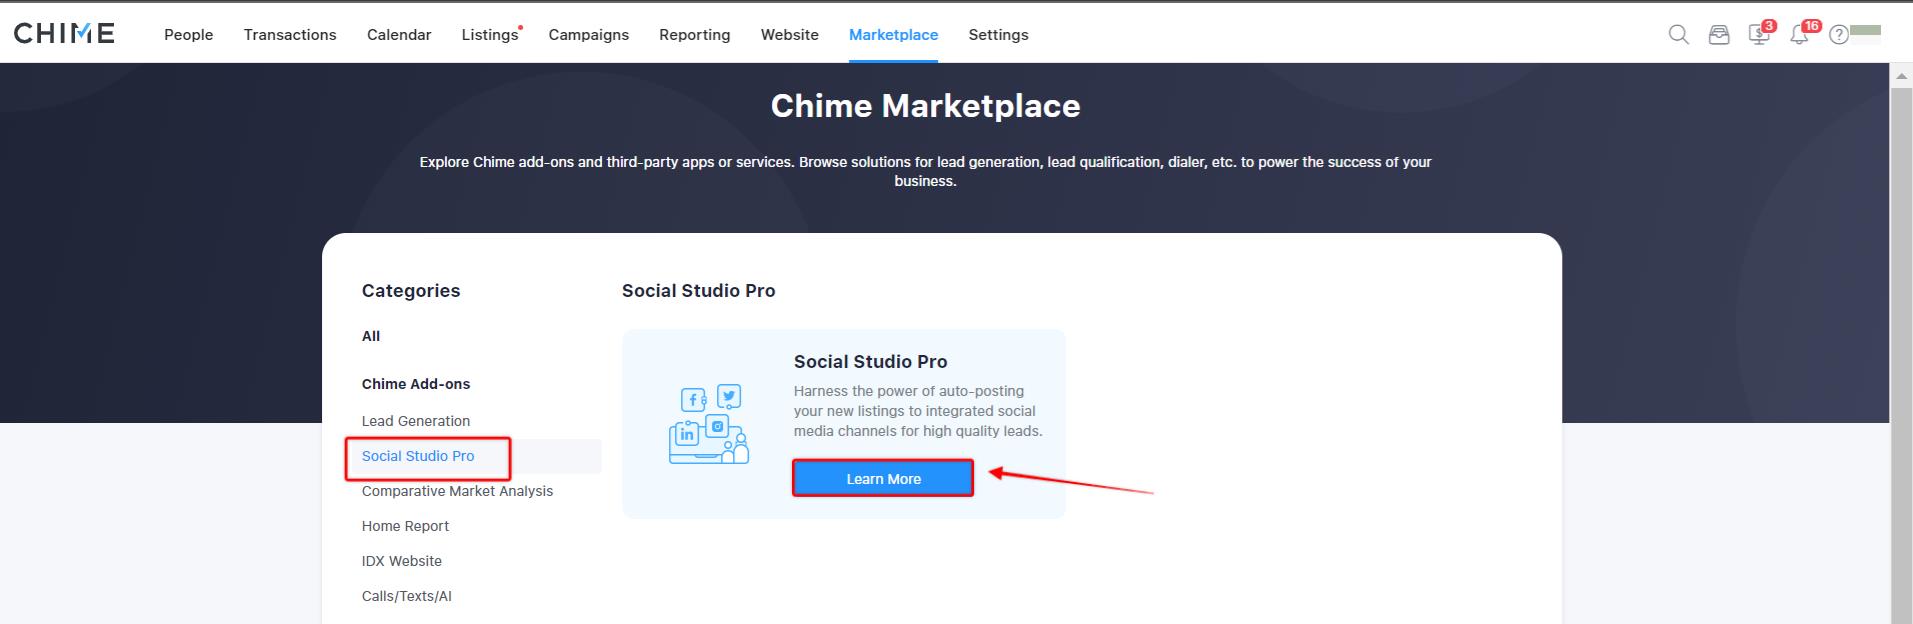 Marketplace___Chime_and_1_more_page_-__InPrivate__-_Microsoft__Edge_2022-12-28_at_6.22.27_AM.jpeg